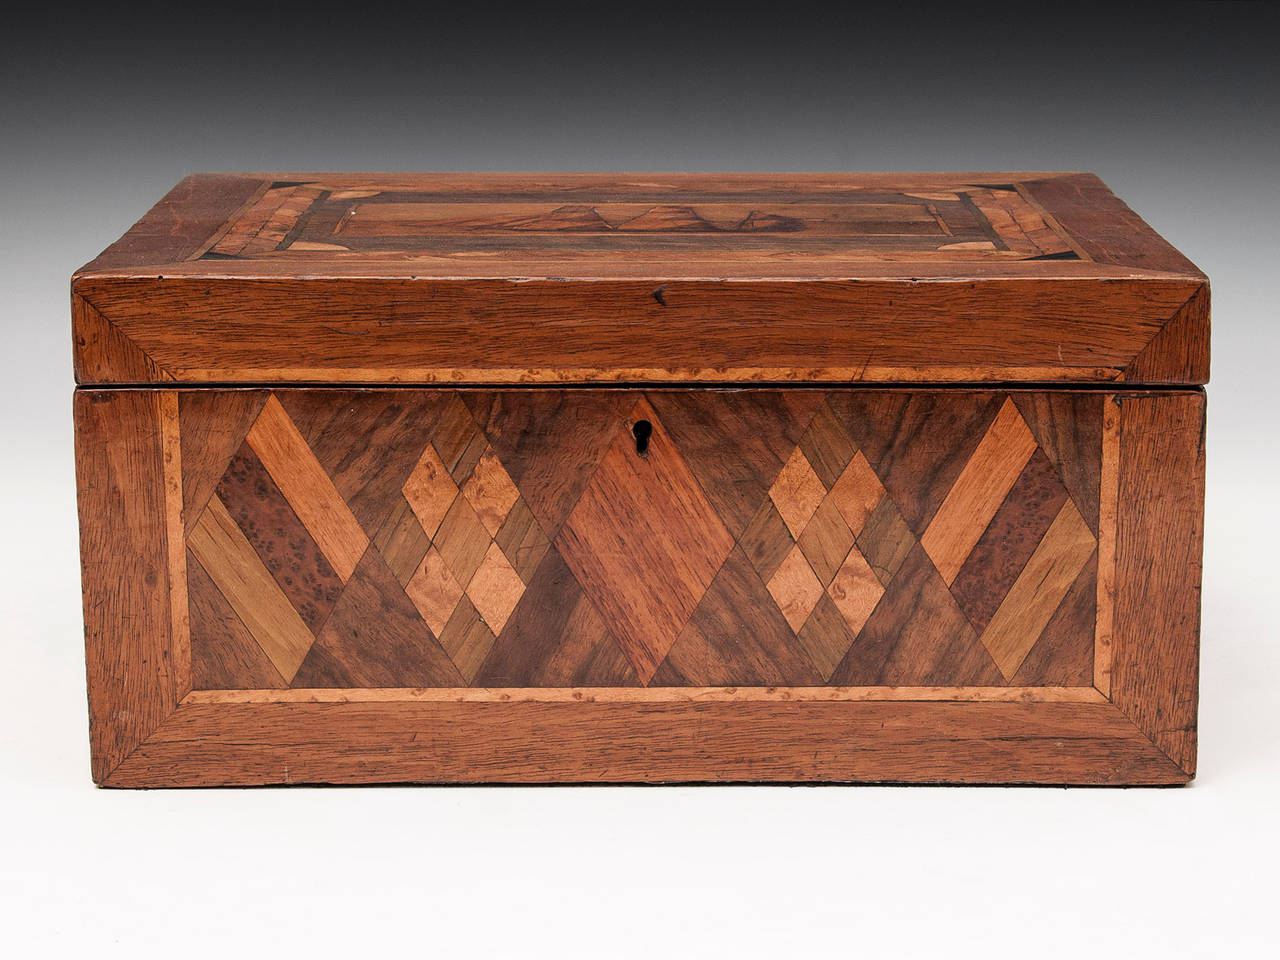 Trinity House Box veneered in mahogany and walnut with a view of a Tea Clipper on the top, diamond shape inlays on the front and Union jack inlays to each side. 

The interior is lined with blue paper and velvet. 

This sewing box comes with a fully